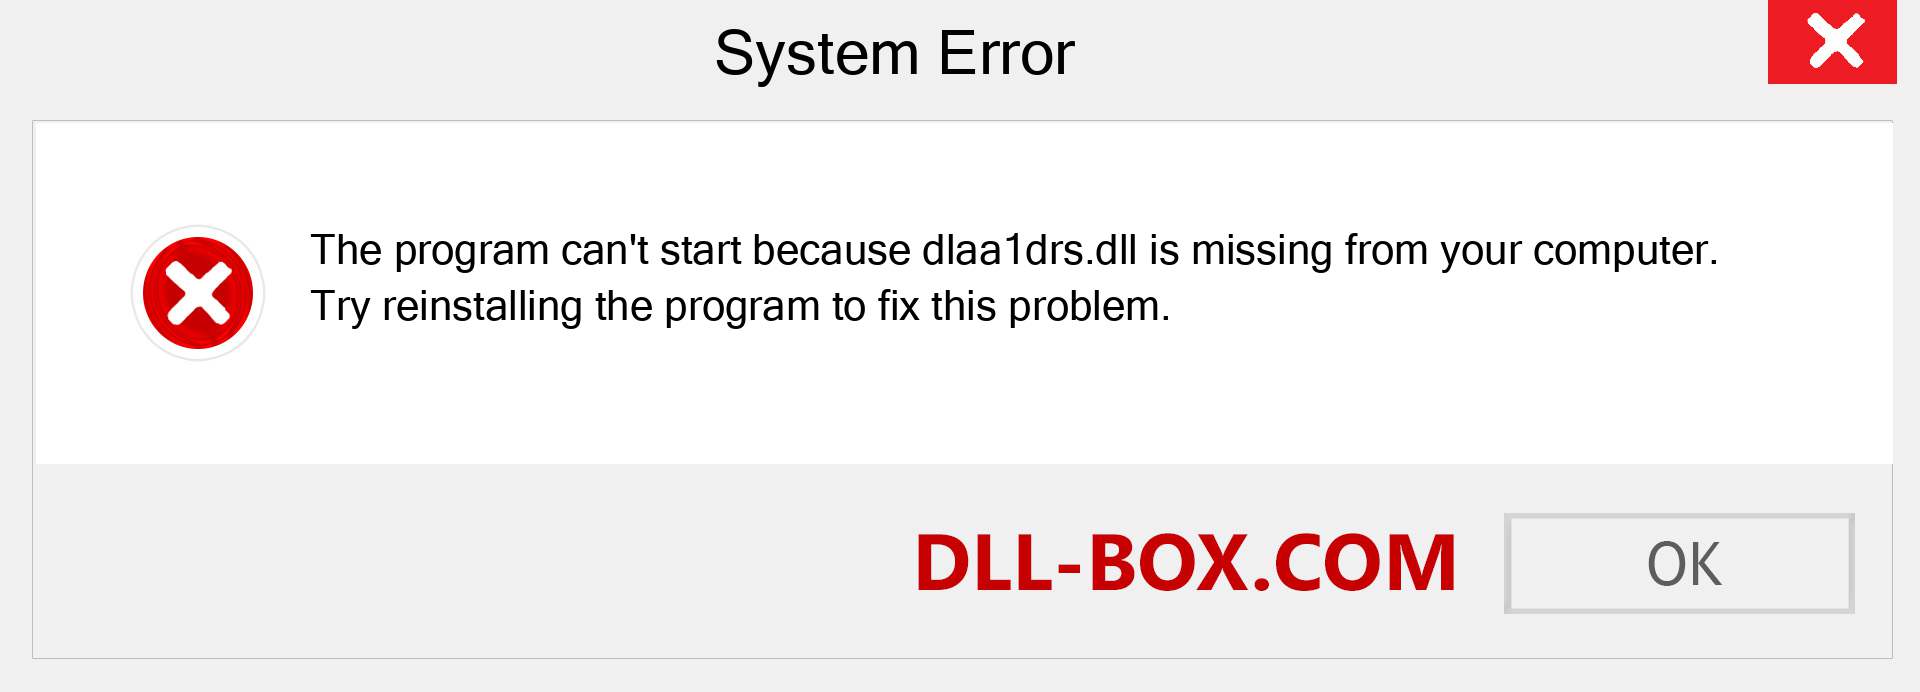  dlaa1drs.dll file is missing?. Download for Windows 7, 8, 10 - Fix  dlaa1drs dll Missing Error on Windows, photos, images